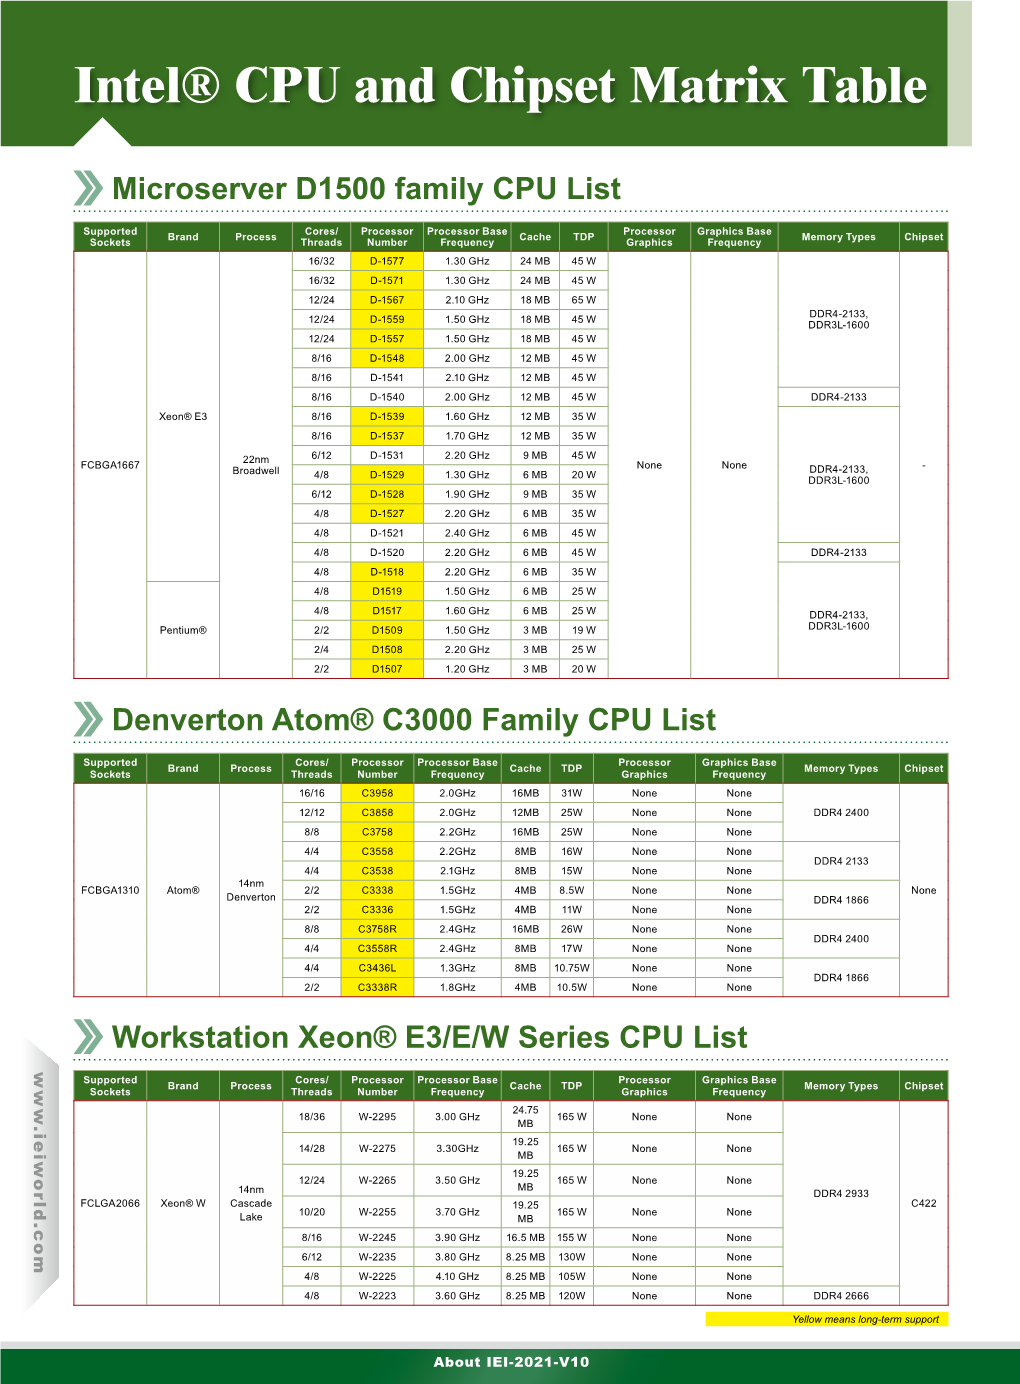 Intel® CPU and Chipset Matrix Table